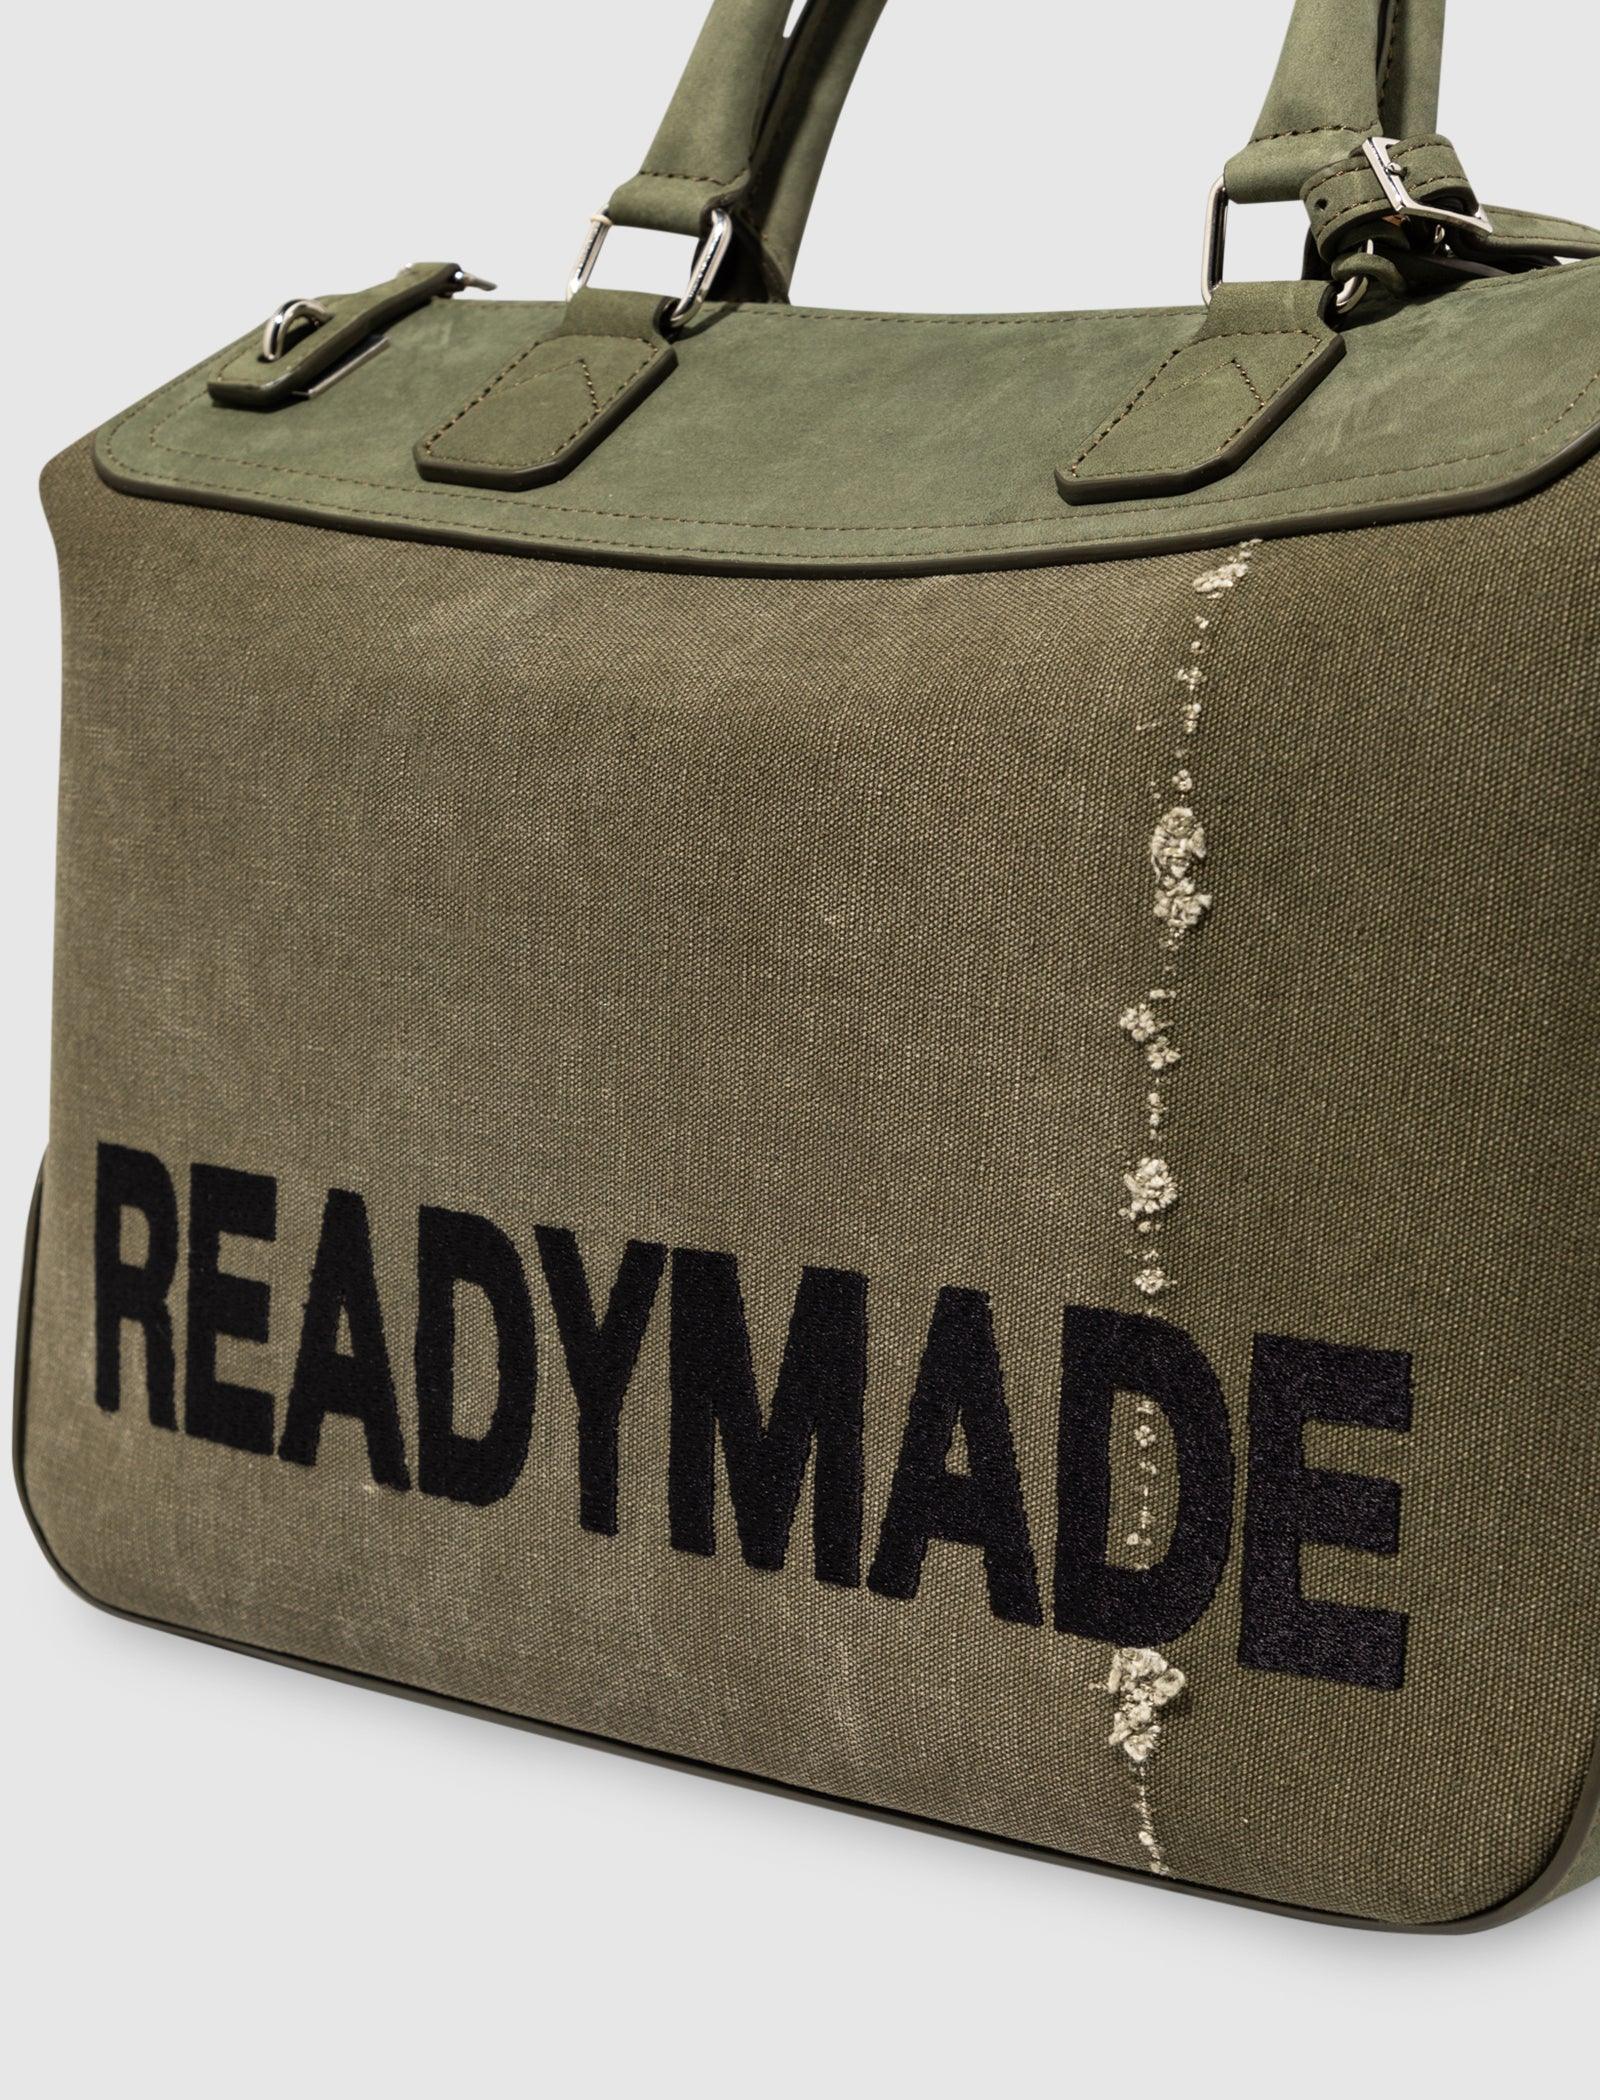 Buy Readymade men green cotton bag with washbag for $2,165 online on SV77,  RE-CO-KH-00-00-105